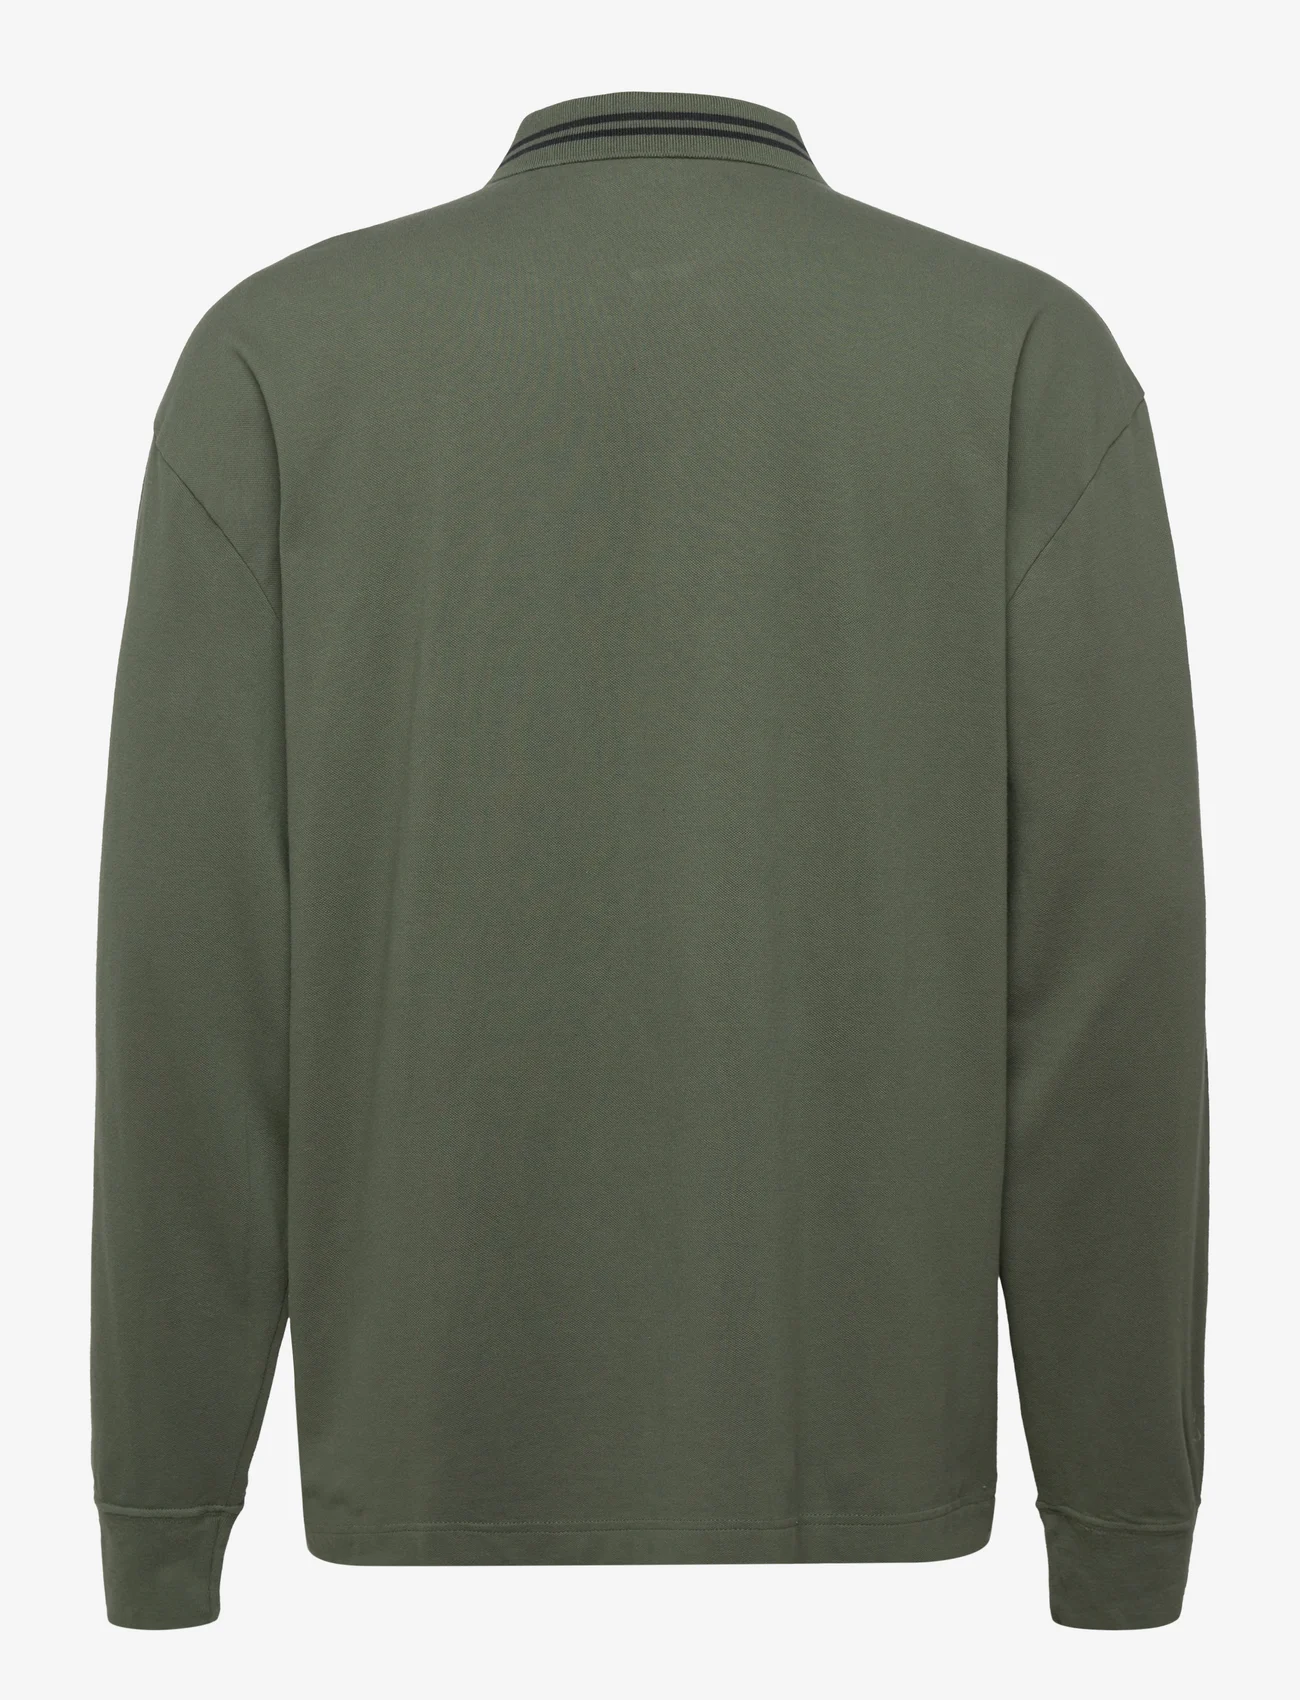 Abercrombie & Fitch - ANF MENS KNITS - langärmelig - green - 1